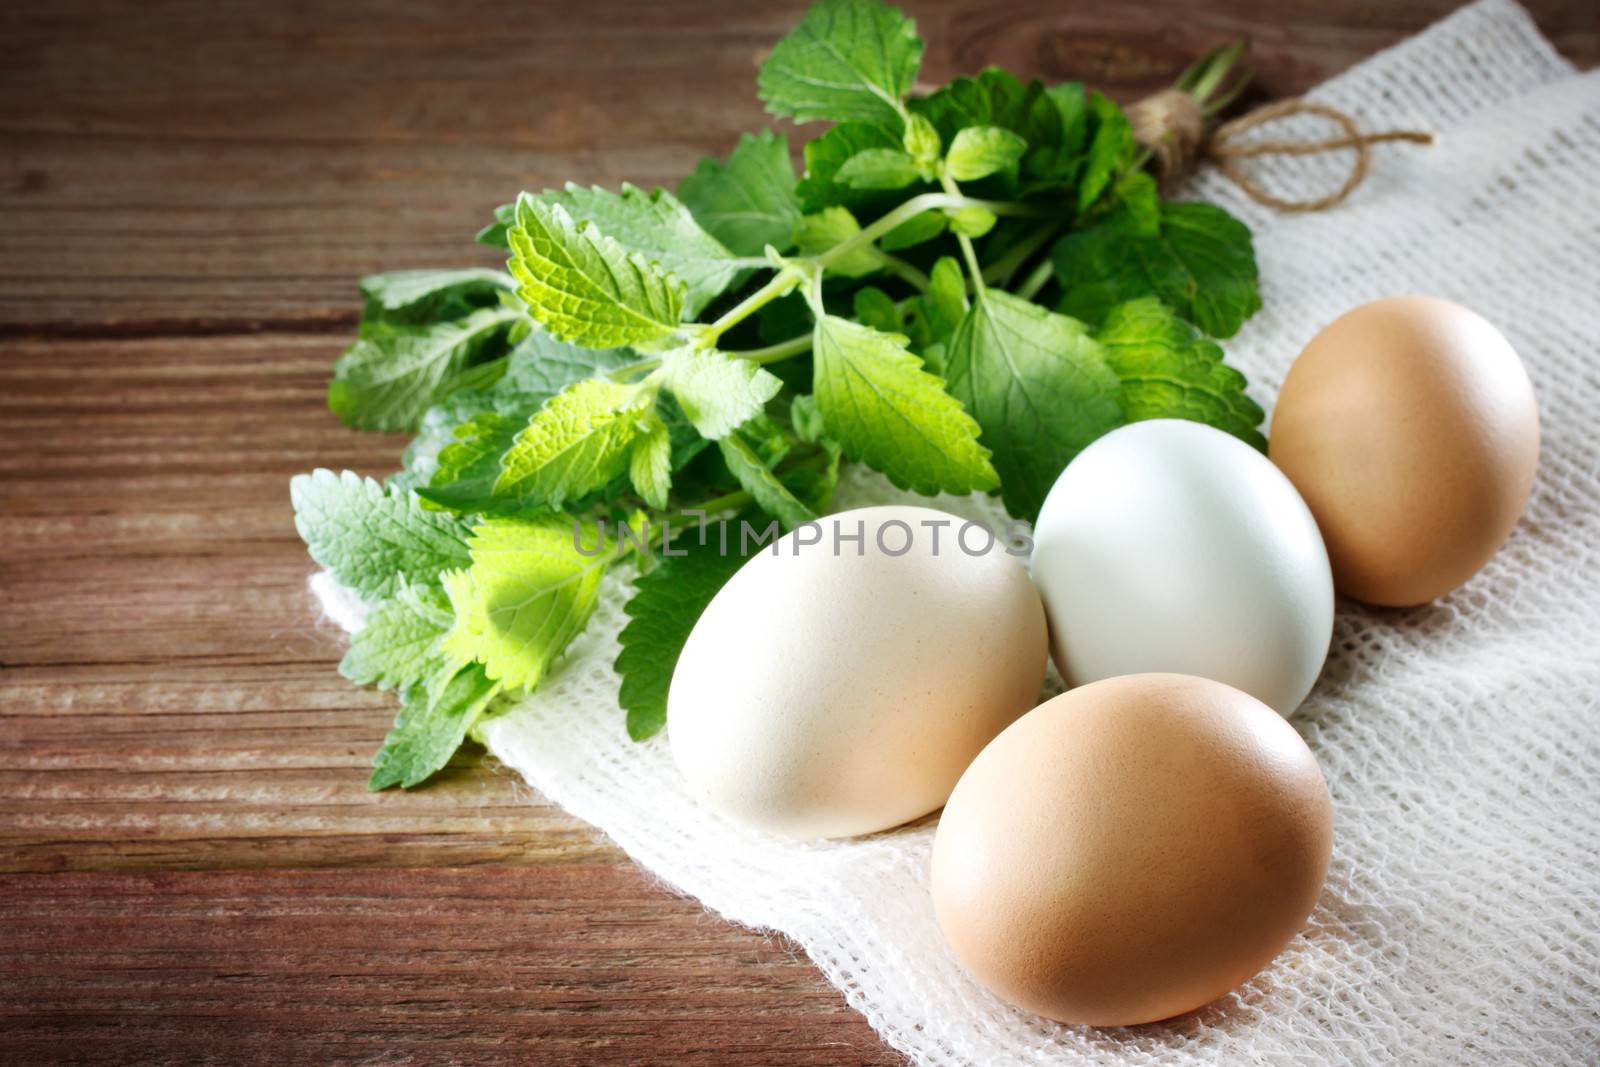 Eggs on a rustic wooden table  by melpomene